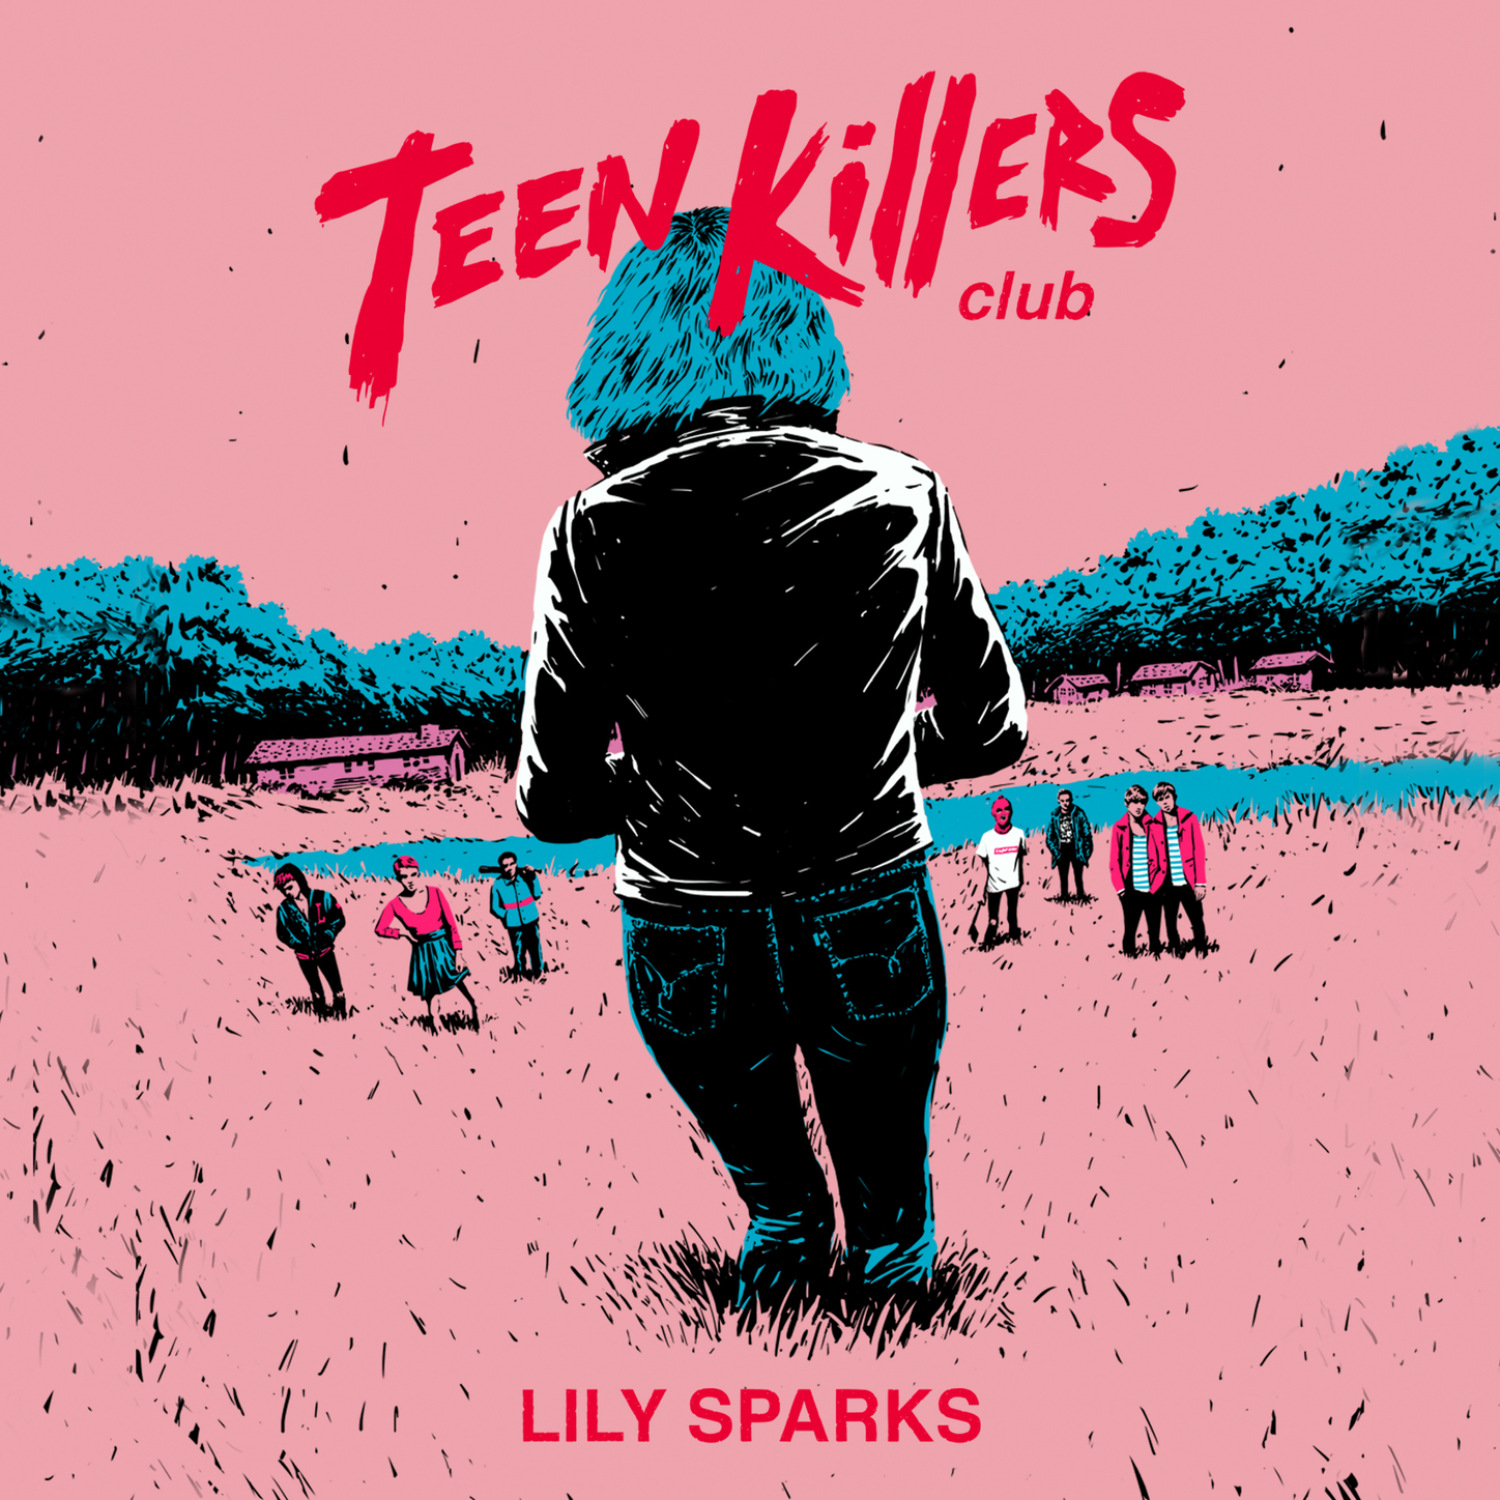 Lily sparks